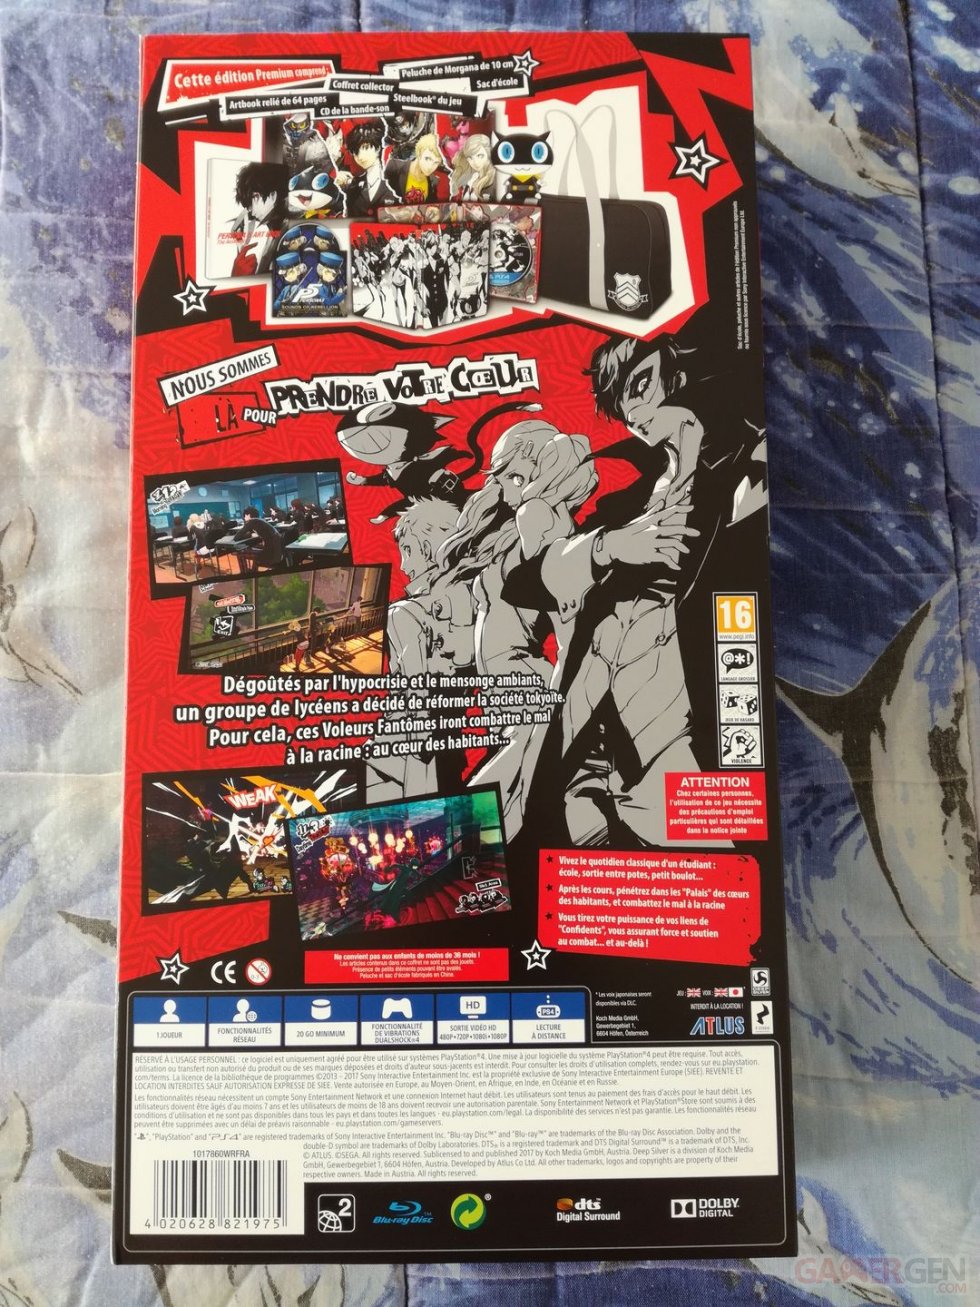 Persona-5-P5-collector-Take-Your-Heart-Premium-Edition-unboxing-deballage-02-04-04-2017